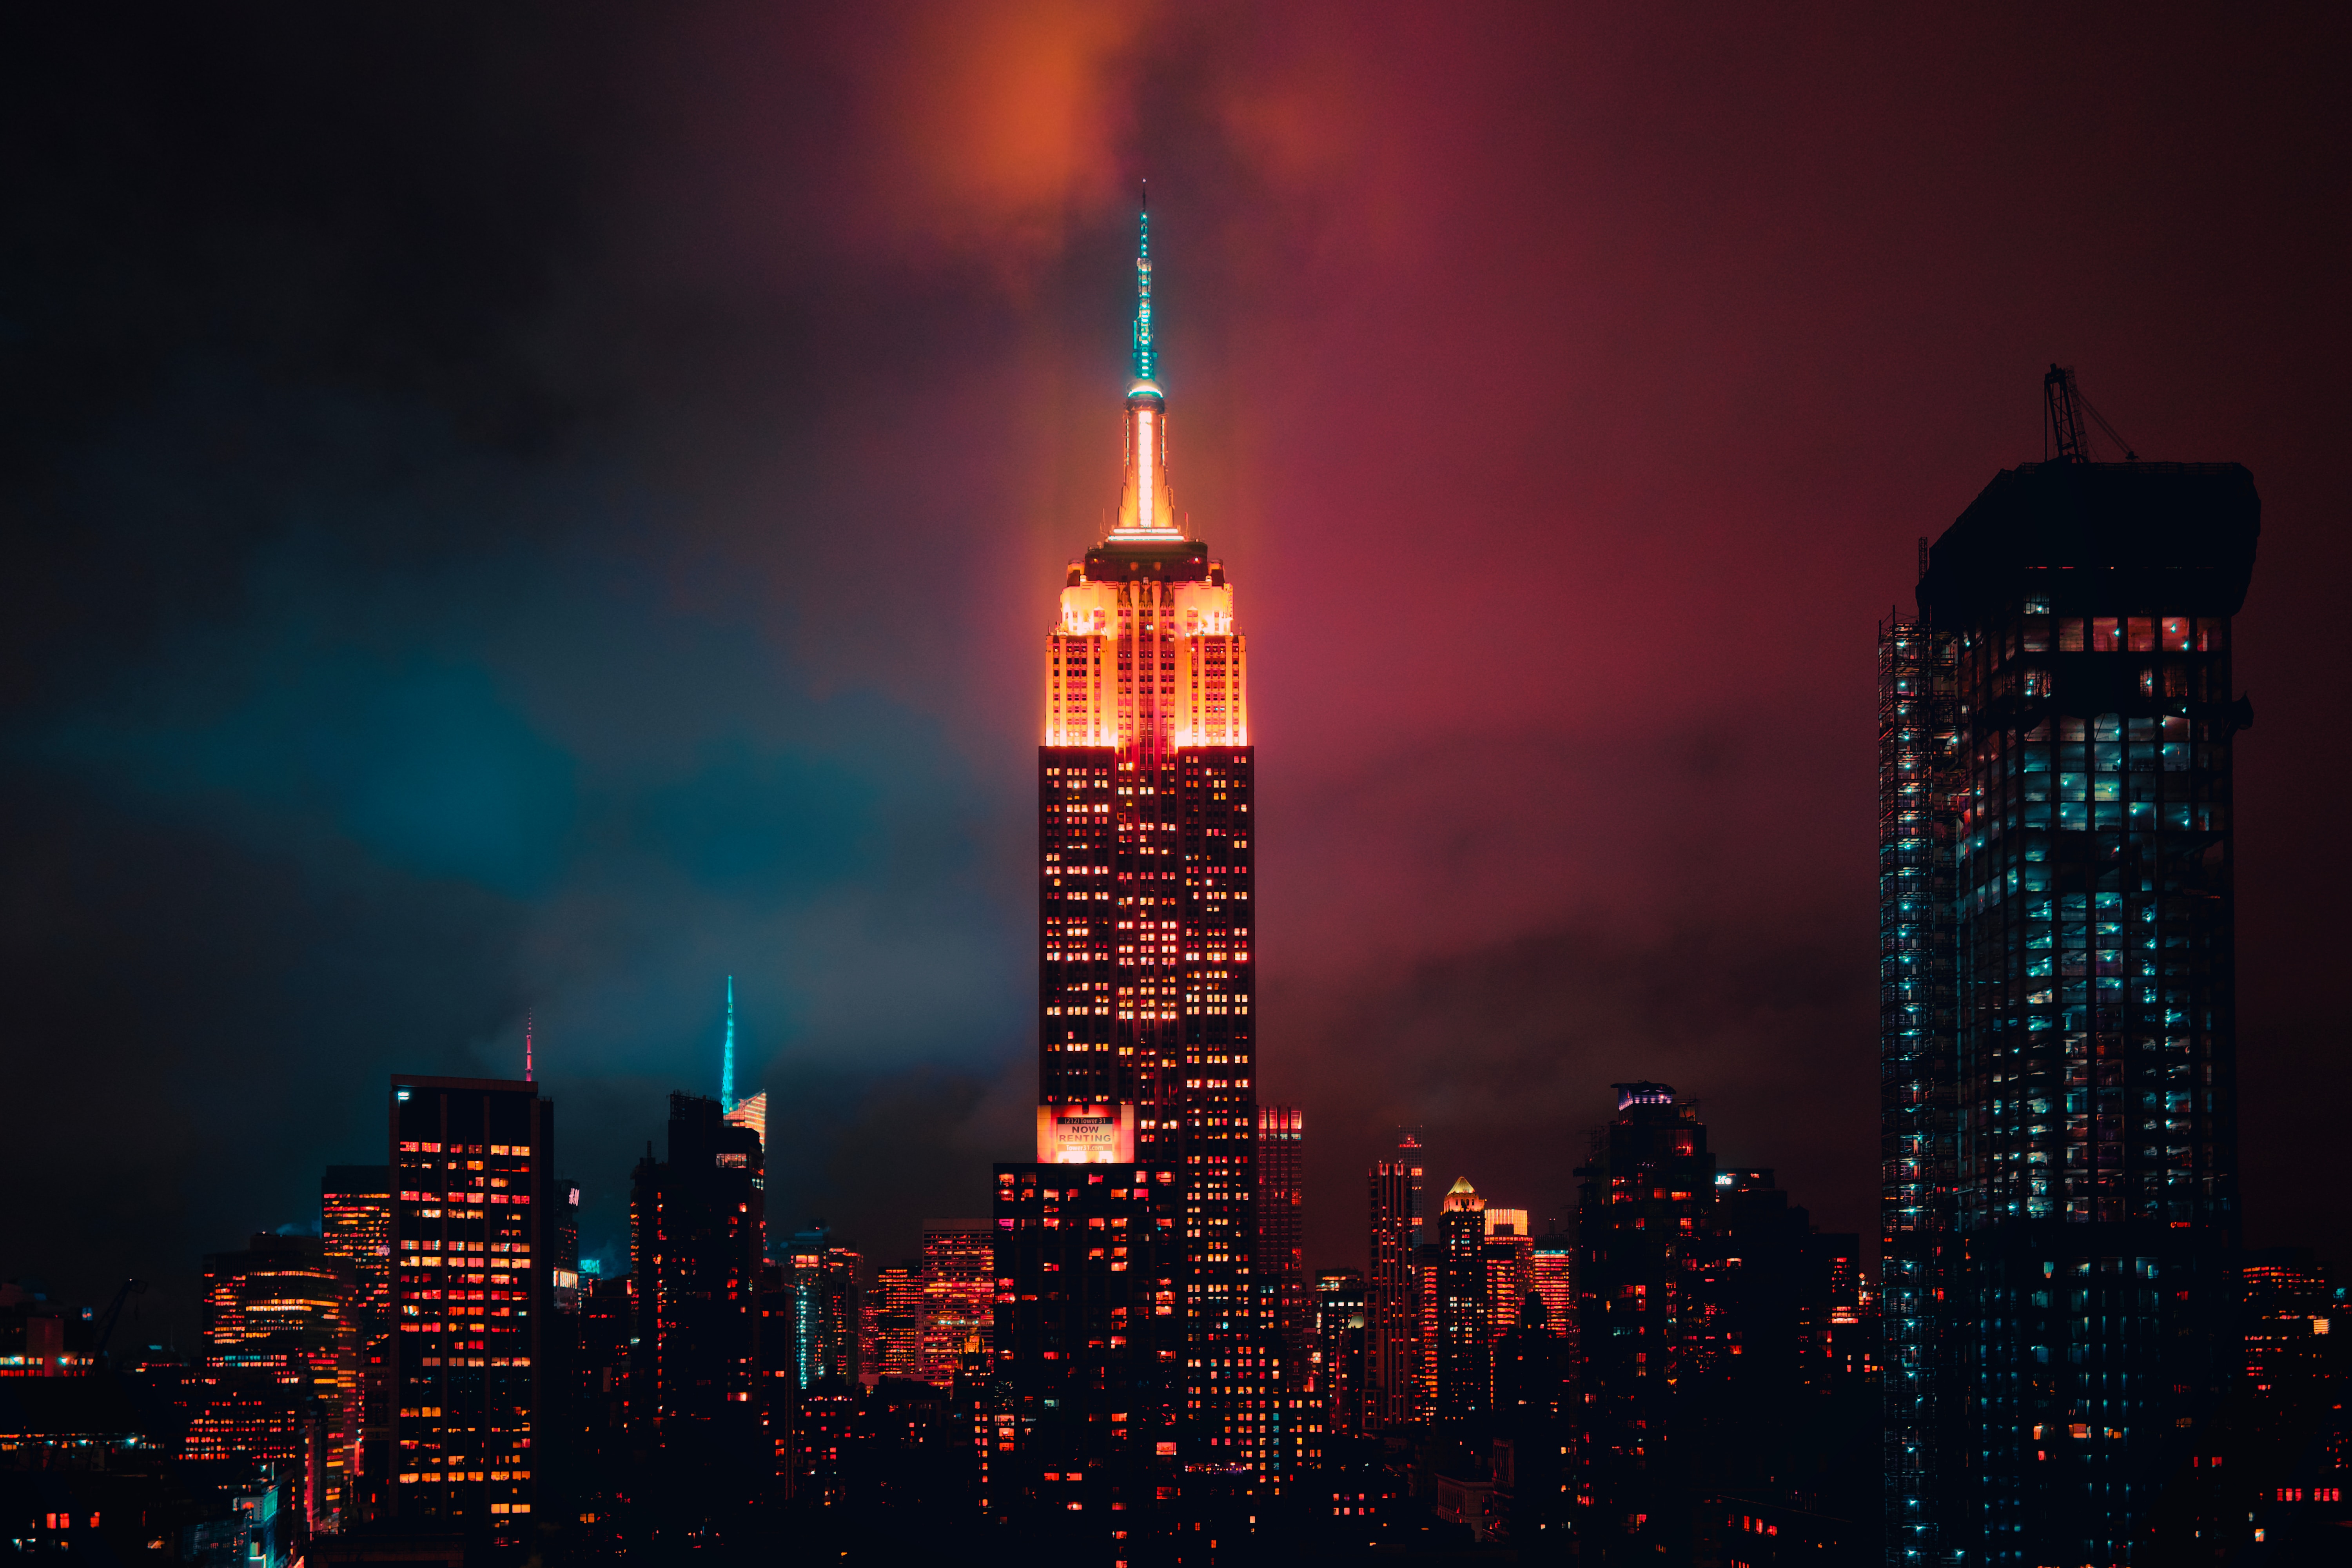 General 6000x4000 Empire State Building New York City night cityscape lights USA photography red North America landmark